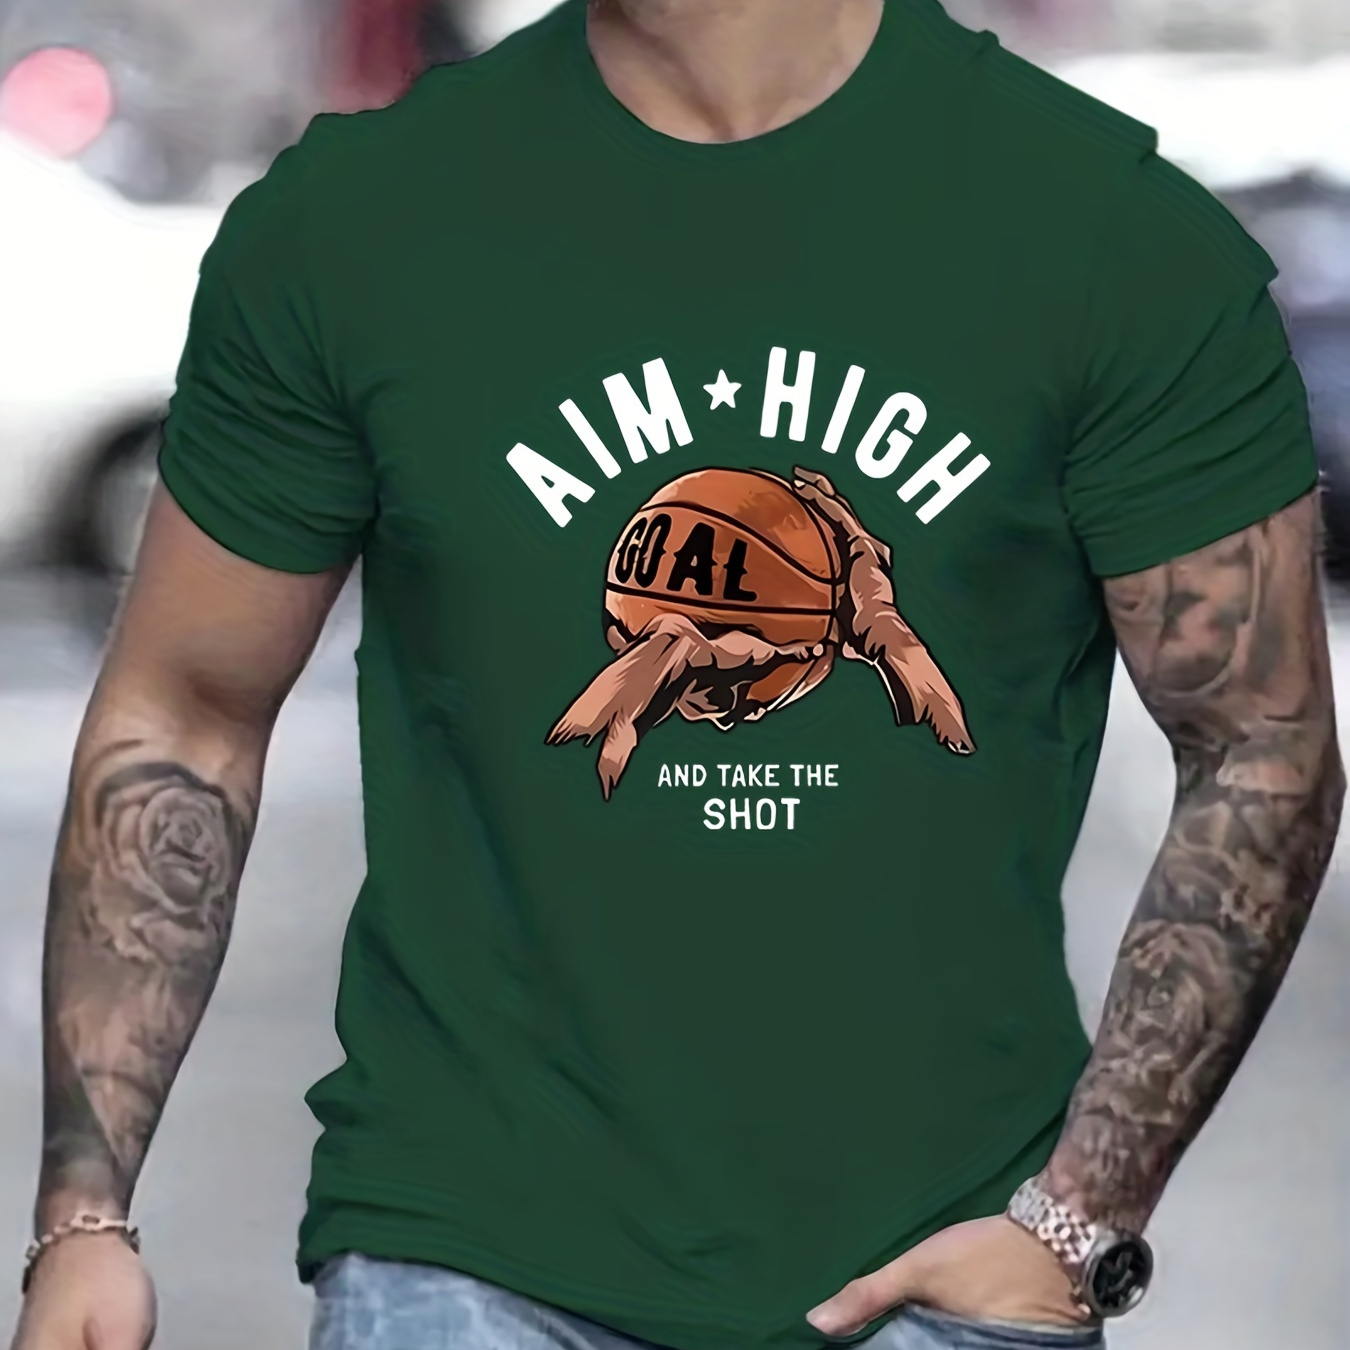 

Basketball & "aim High" Pattern Print Men's Comfy T-shirt, Graphic Tee Men's Summer Outdoor Clothes, Men's Clothing, Tops For Men, Gift For Men